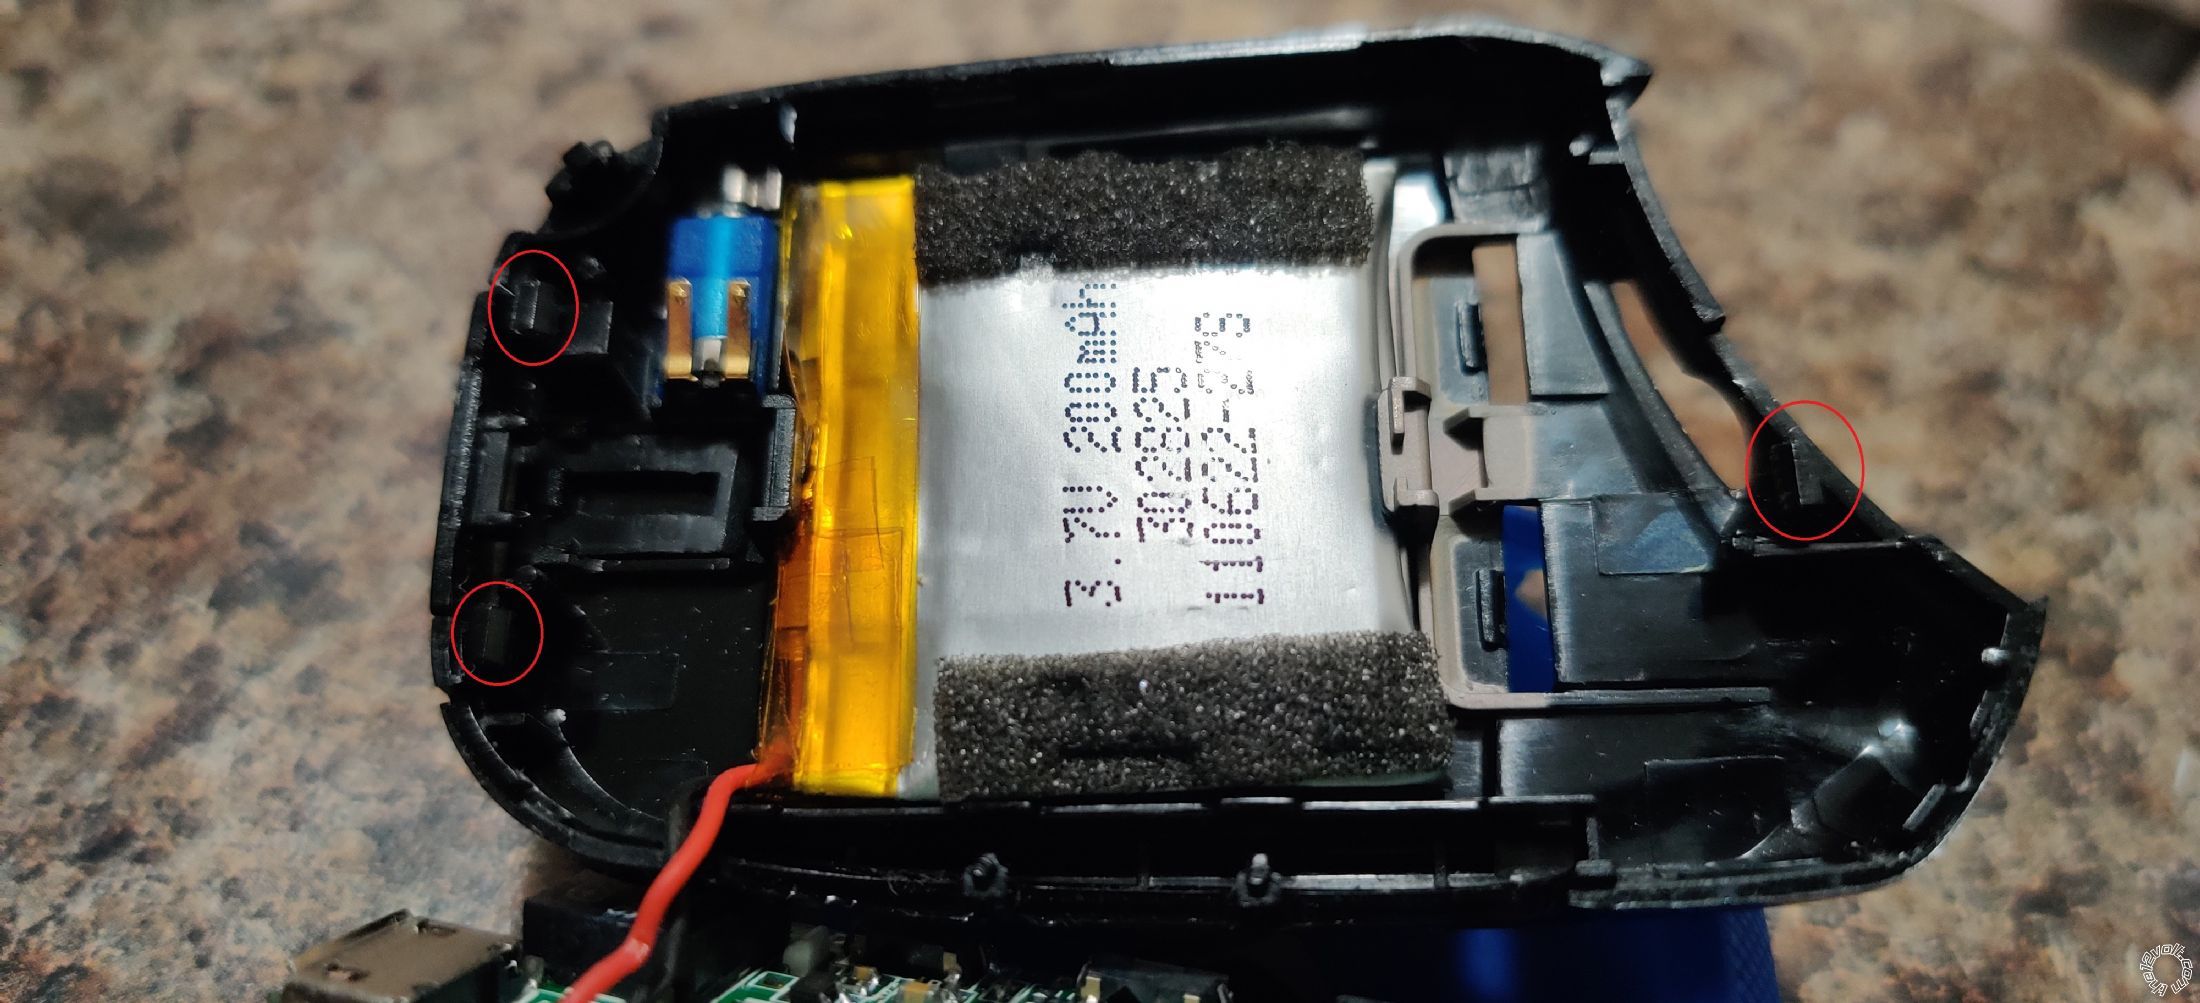 Compustar 2W901R-SS Battery - Last Post -- posted image.